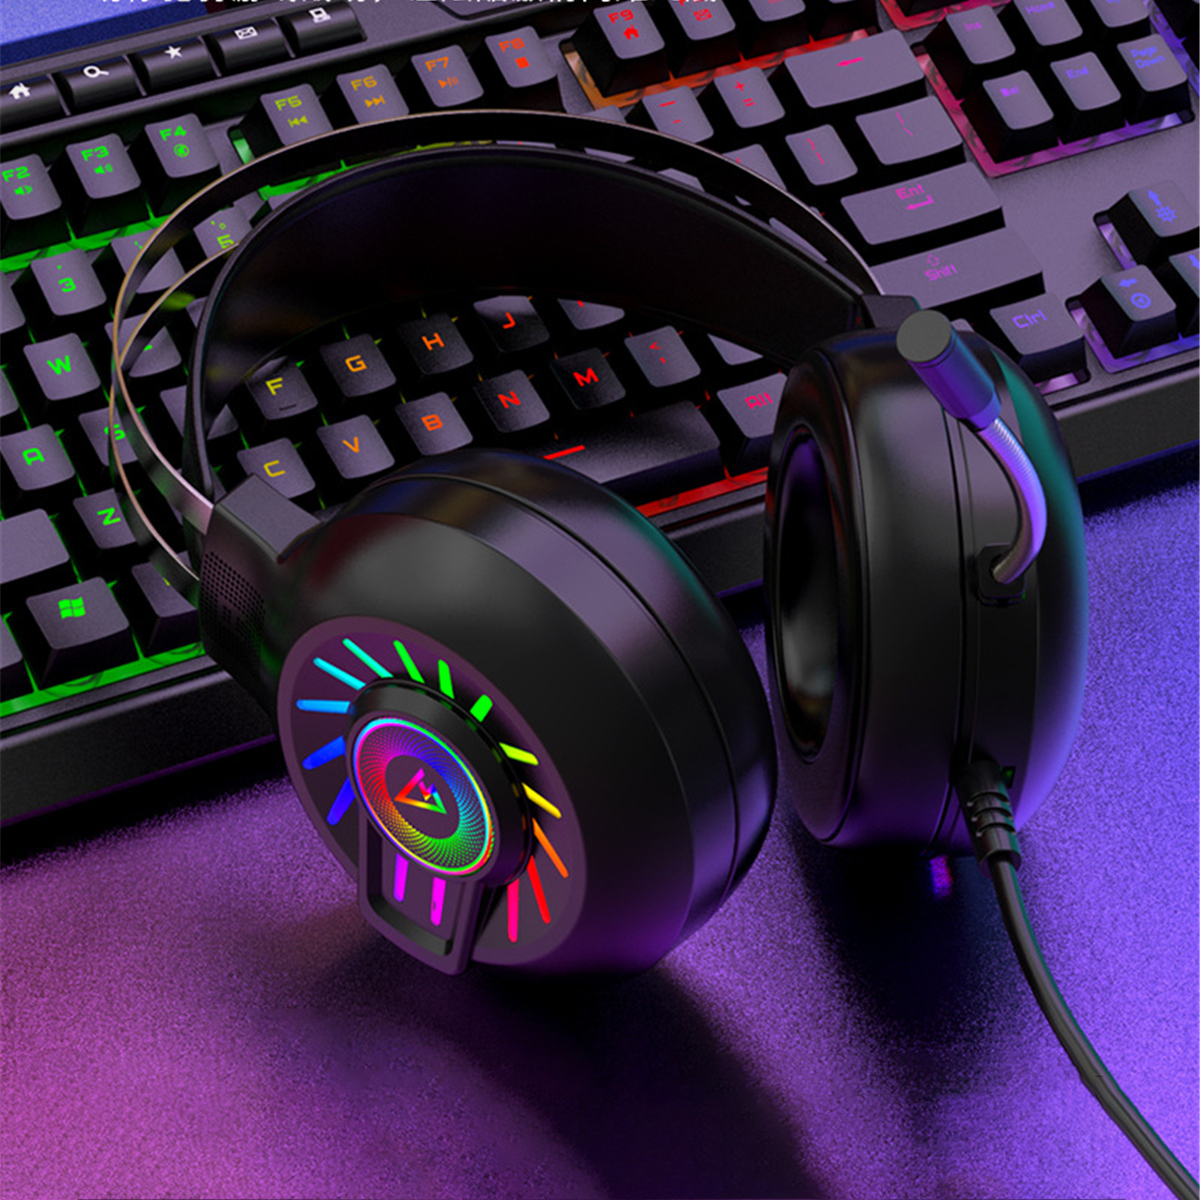 Bakeey M10 Gaming Headset 50mm Drivers Noise Reduction RGB Luminous Head-Mounted 3.5mm Gaming Headphones with Mic